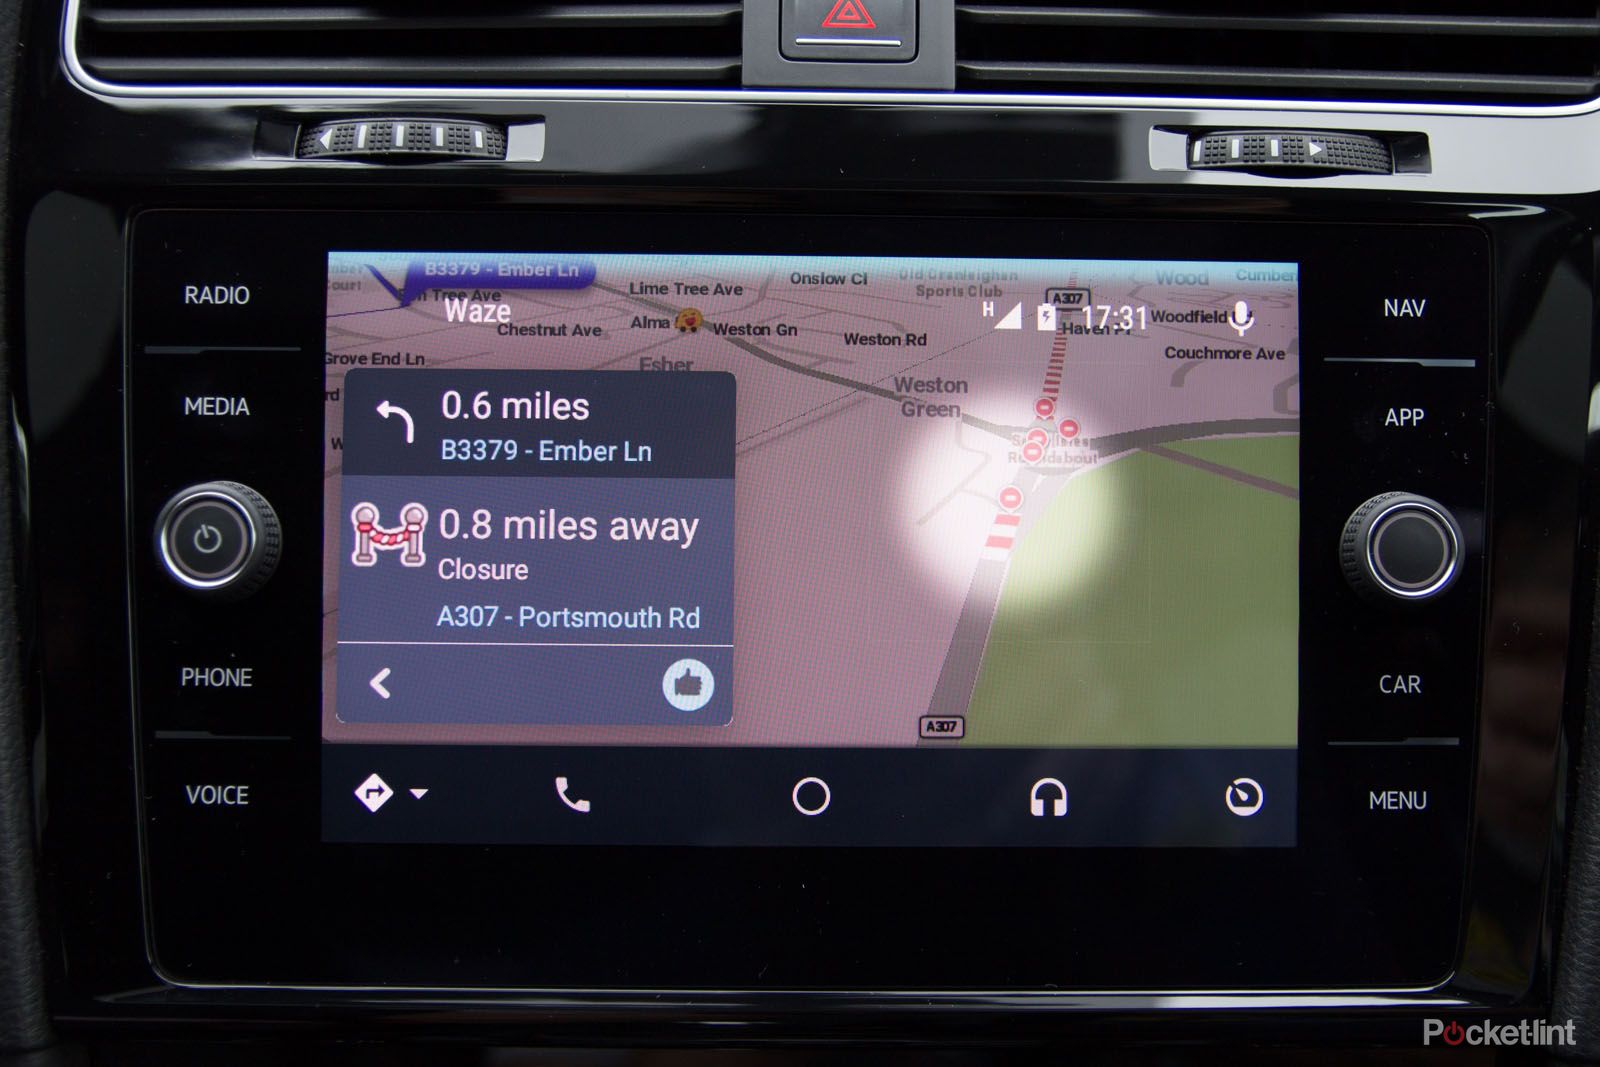 Waze Partners With Vw To Reveals Some Awesome Driving Routes Around The Uk image 2